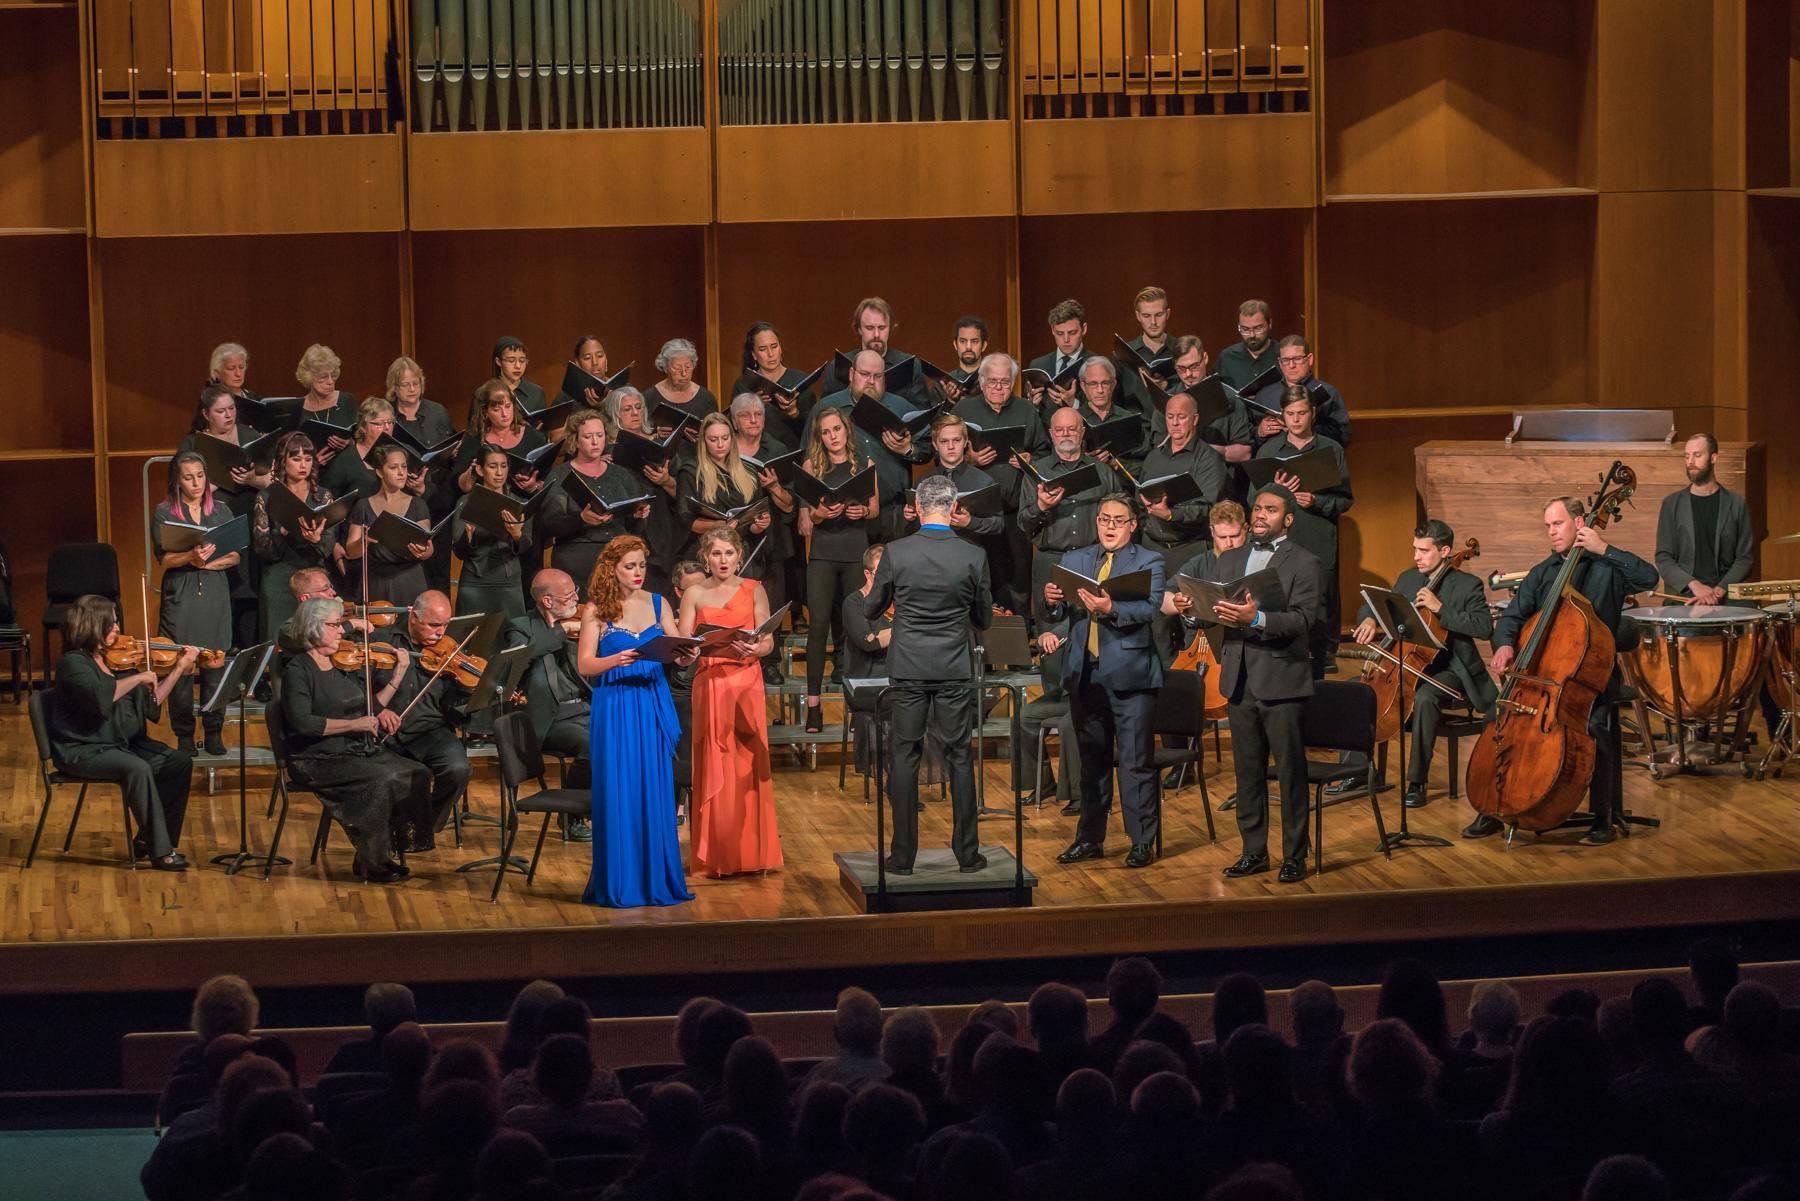 Members of the Fairbanks Summer Arts Festival Symphony and Choir, conducted by Houston Symphony associate conductor Robert Franz, perform the world premiere of "Mass for the Oppressed" on July 30 in the UAF Davis Concert Hall. (Photo courtesy of UAF)